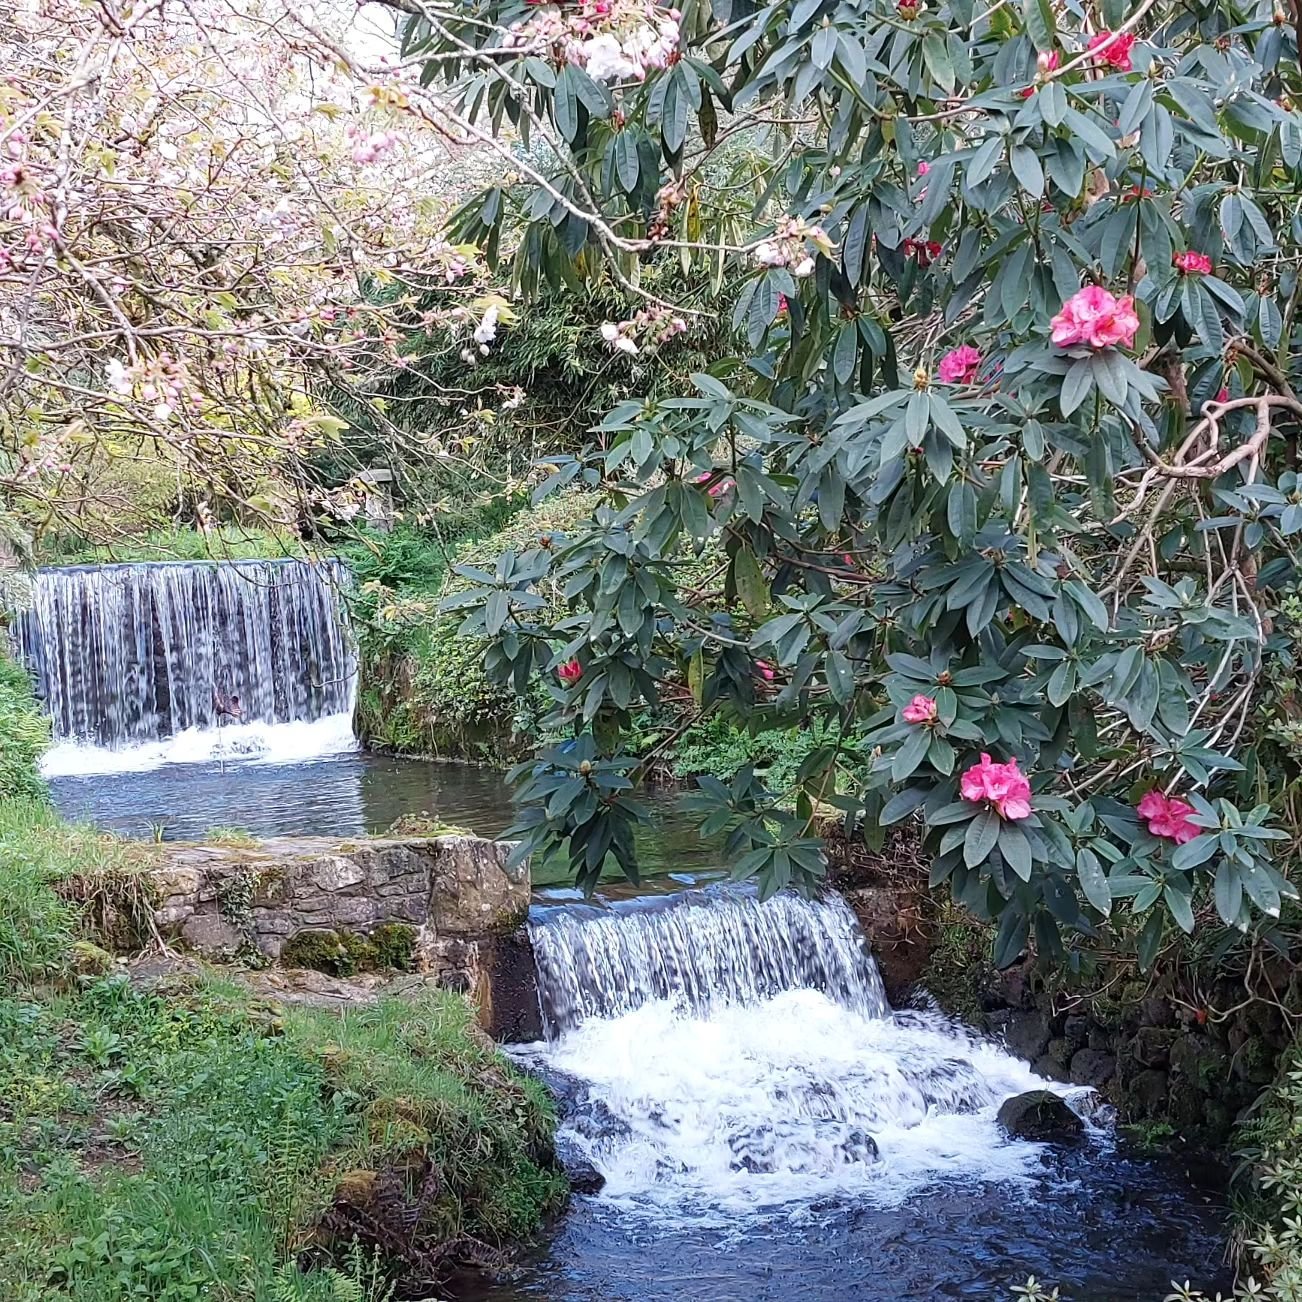 Sunshine, water, fresh new leaves and gorgeous blossom at Lukesland. Don't miss this magical time. We are open Suns, Weds and Bank Hols 11am to 5pm till 9th June. Full details at www.lukesland.co.uk 

#devongardens #devon #devonlife #gardens #nationa